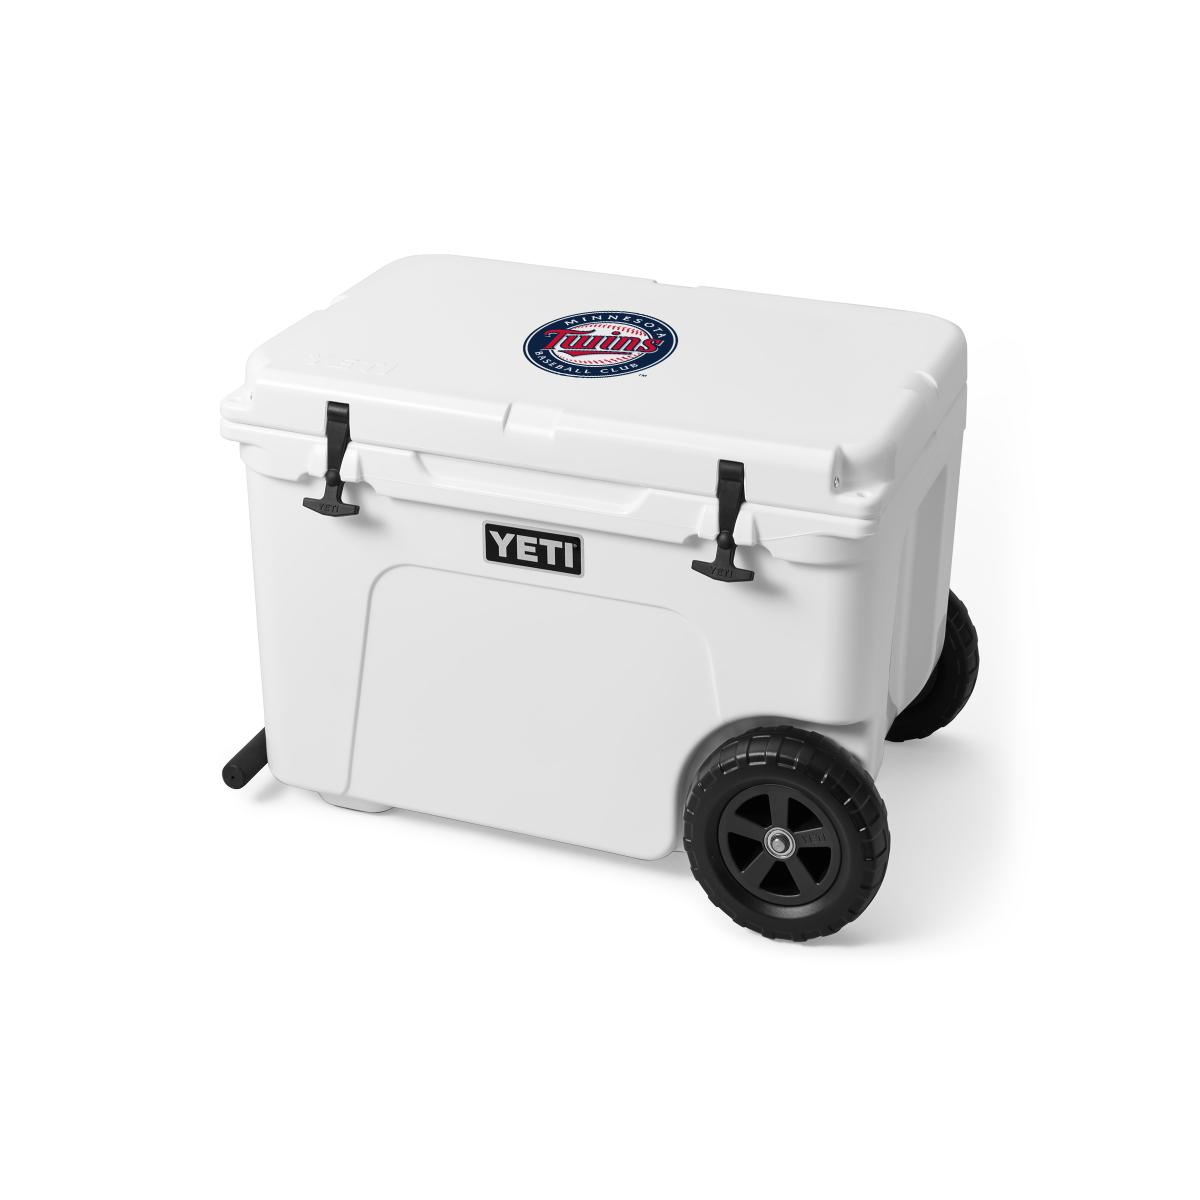 Minnesota Twins custom Coolers and Drinkware from YETI, where to